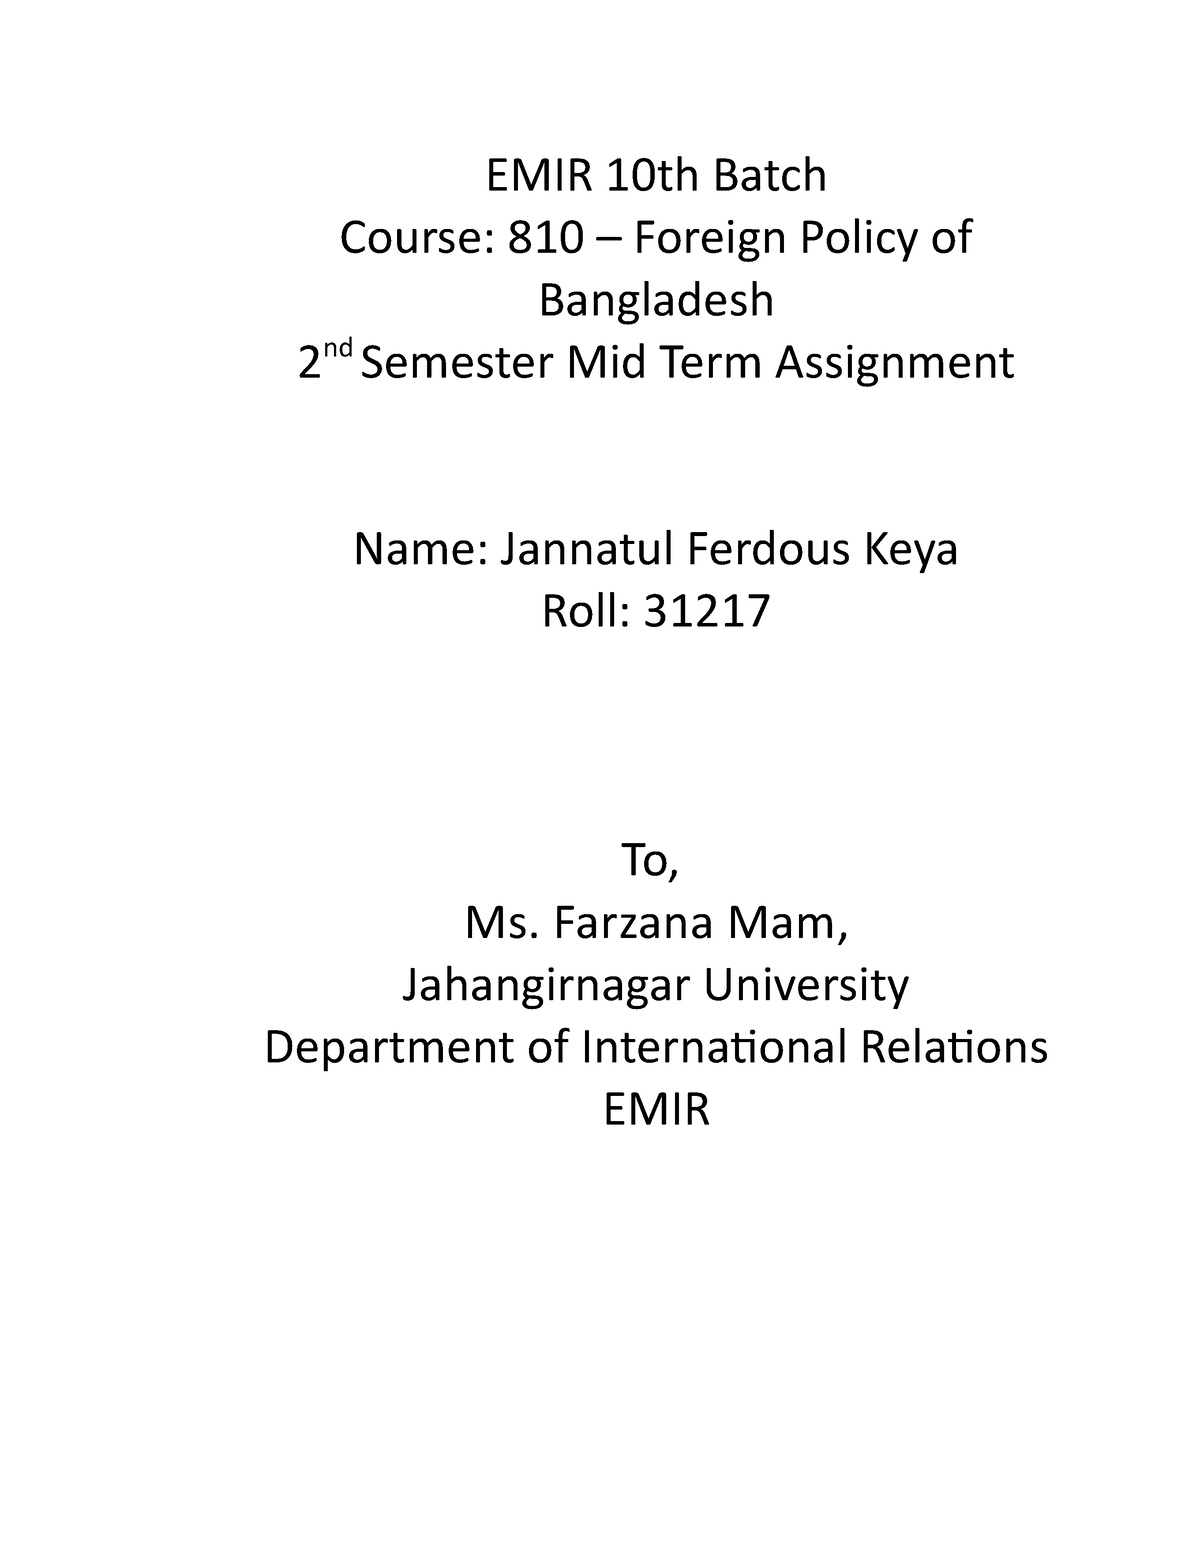 foreign policy of bangladesh assignment